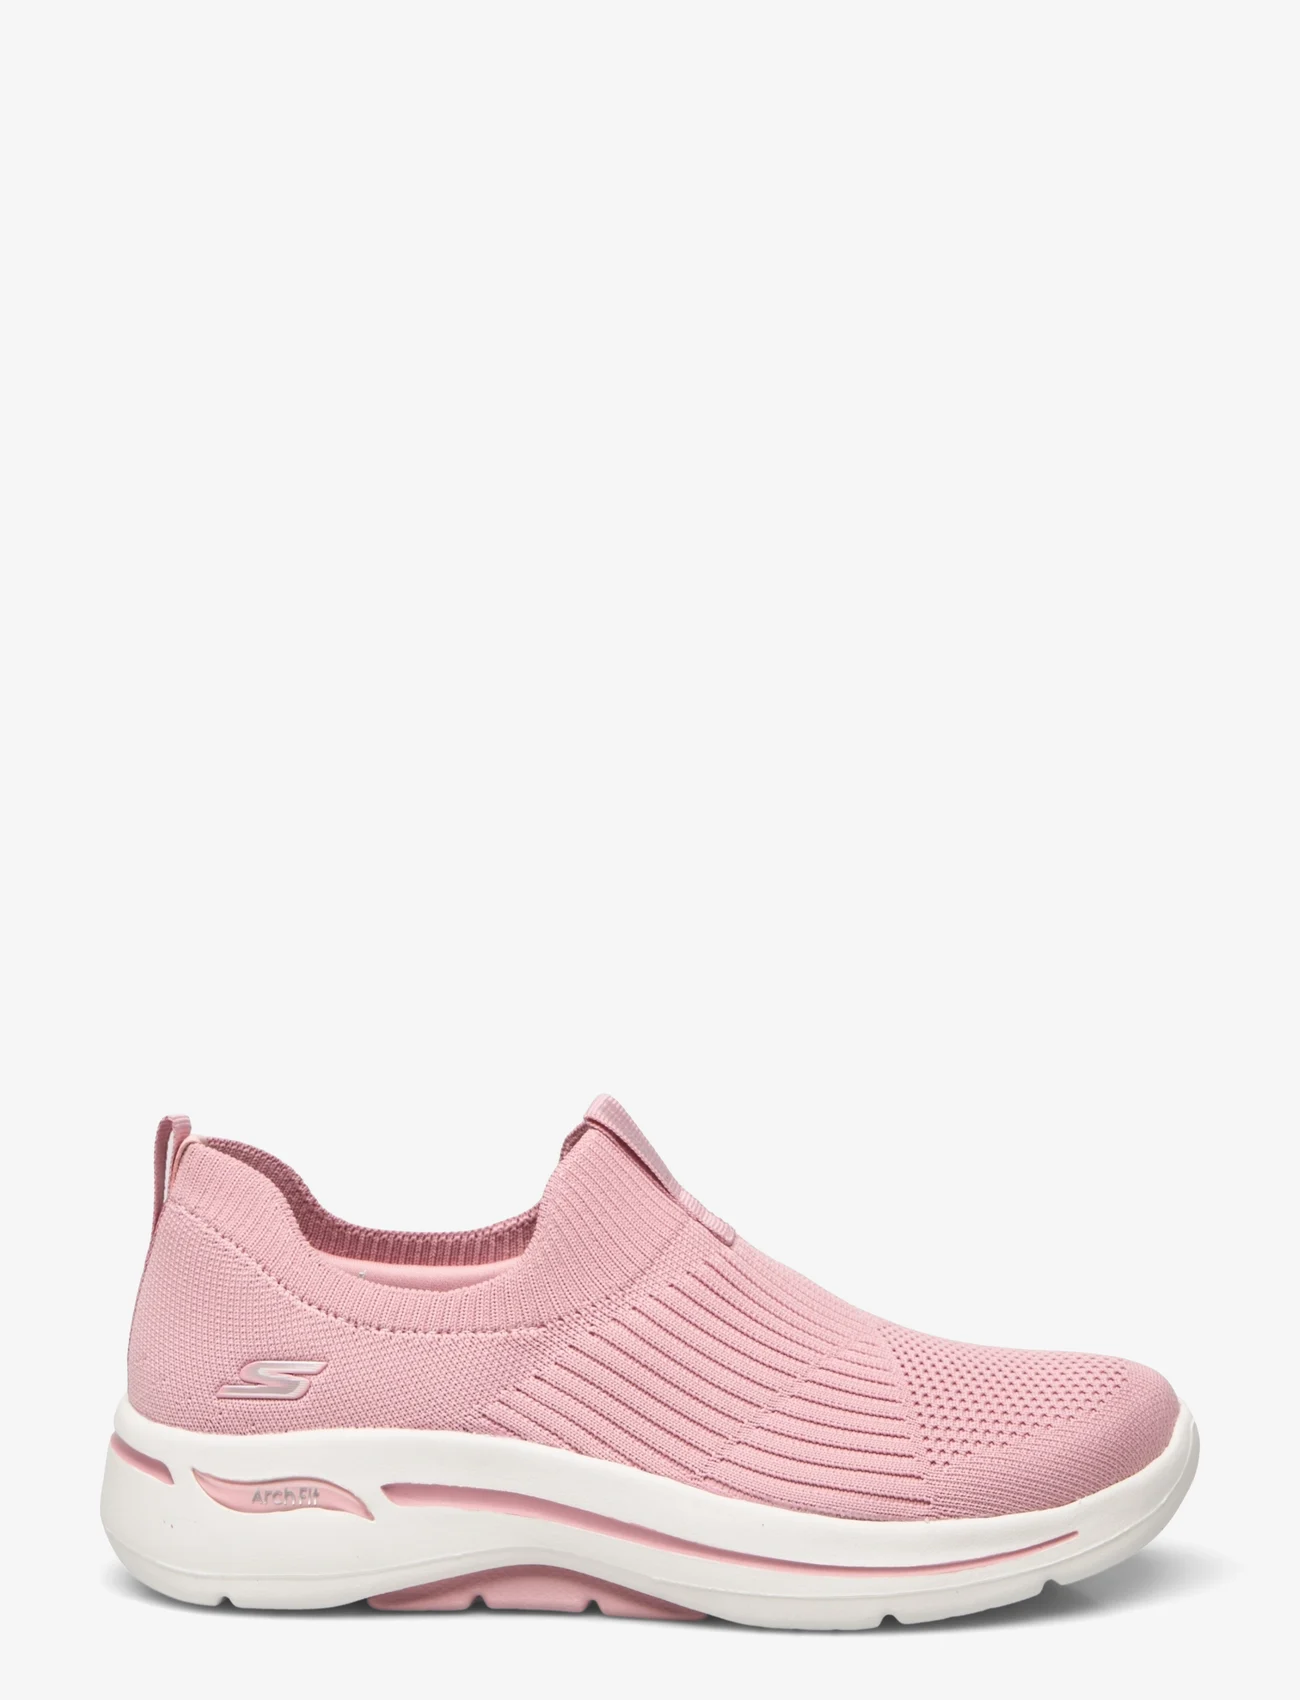 Skechers - Womens Go Walk  Arch Fit  - Iconic - slip-on sneakers - ltpk light pink - 1